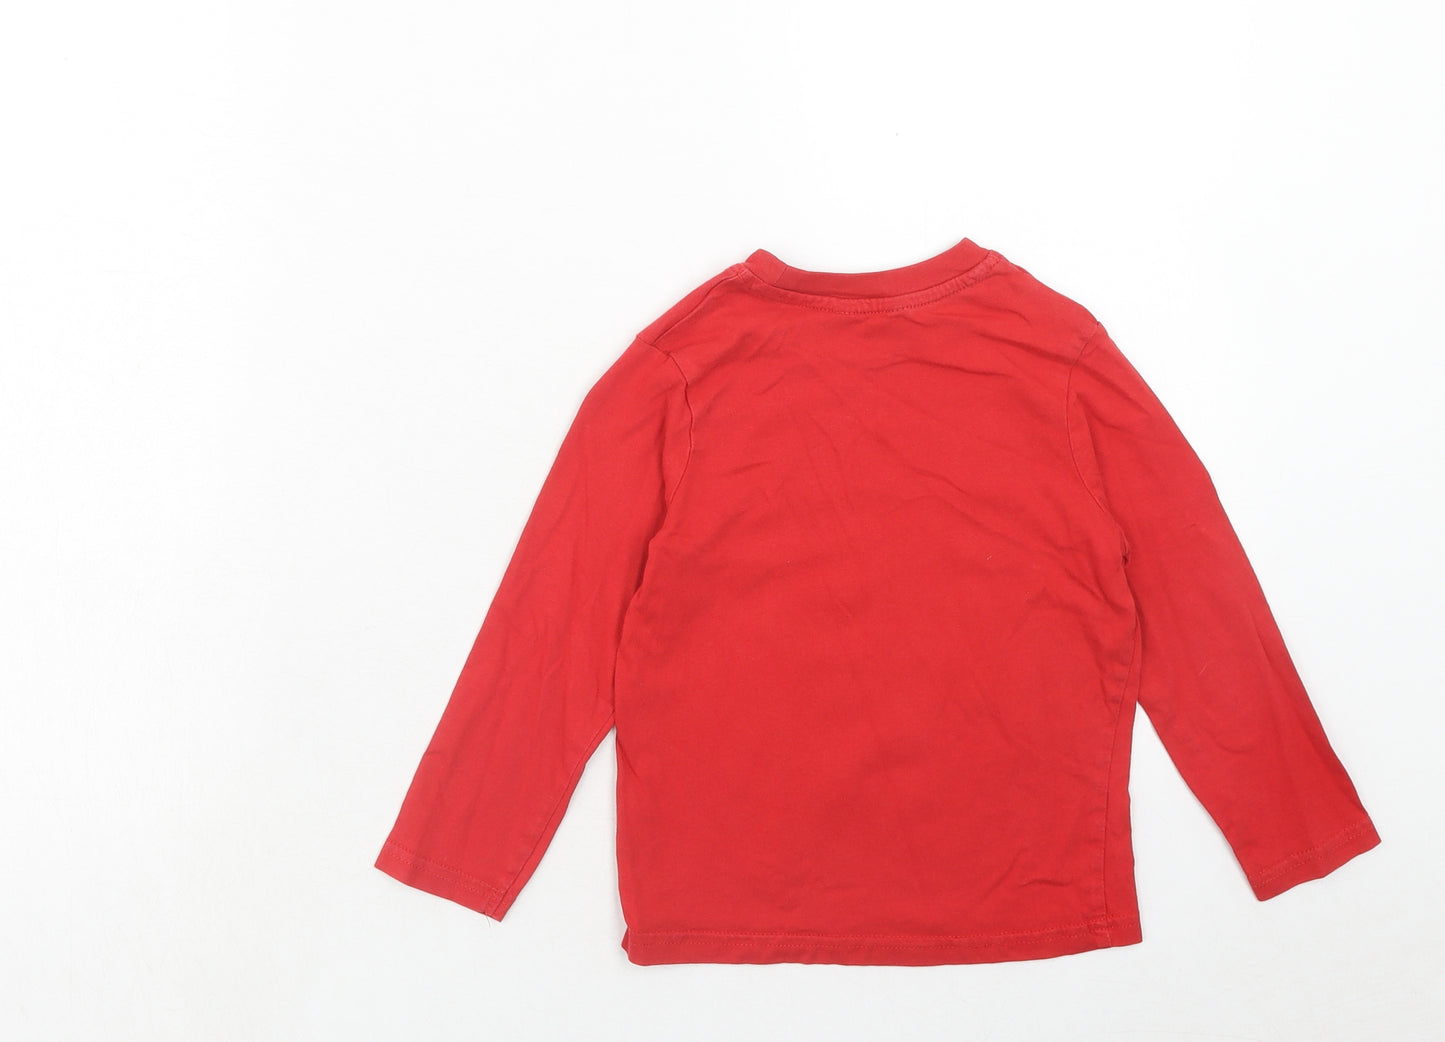 George Boys Red Cotton Basic T-Shirt Size 3-4 Years Round Neck Pullover - Cool